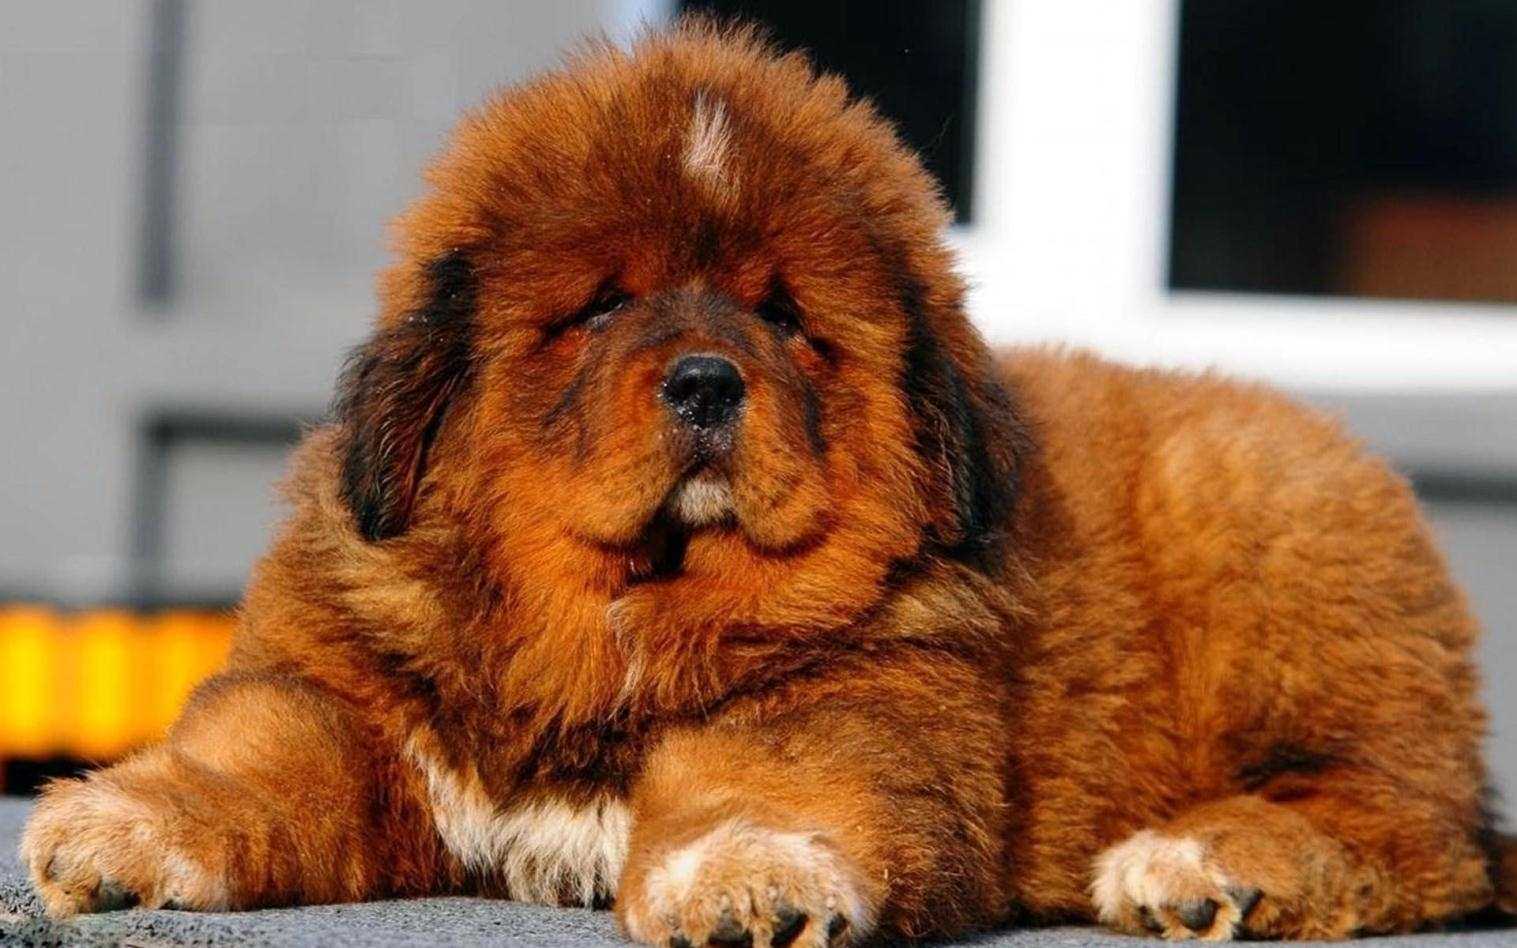 This 🐕 Dog Breeds Quiz May Be a Liiiittle Challenging, But Let’s See If You Can Score 15/20 Tibetan Mastiff